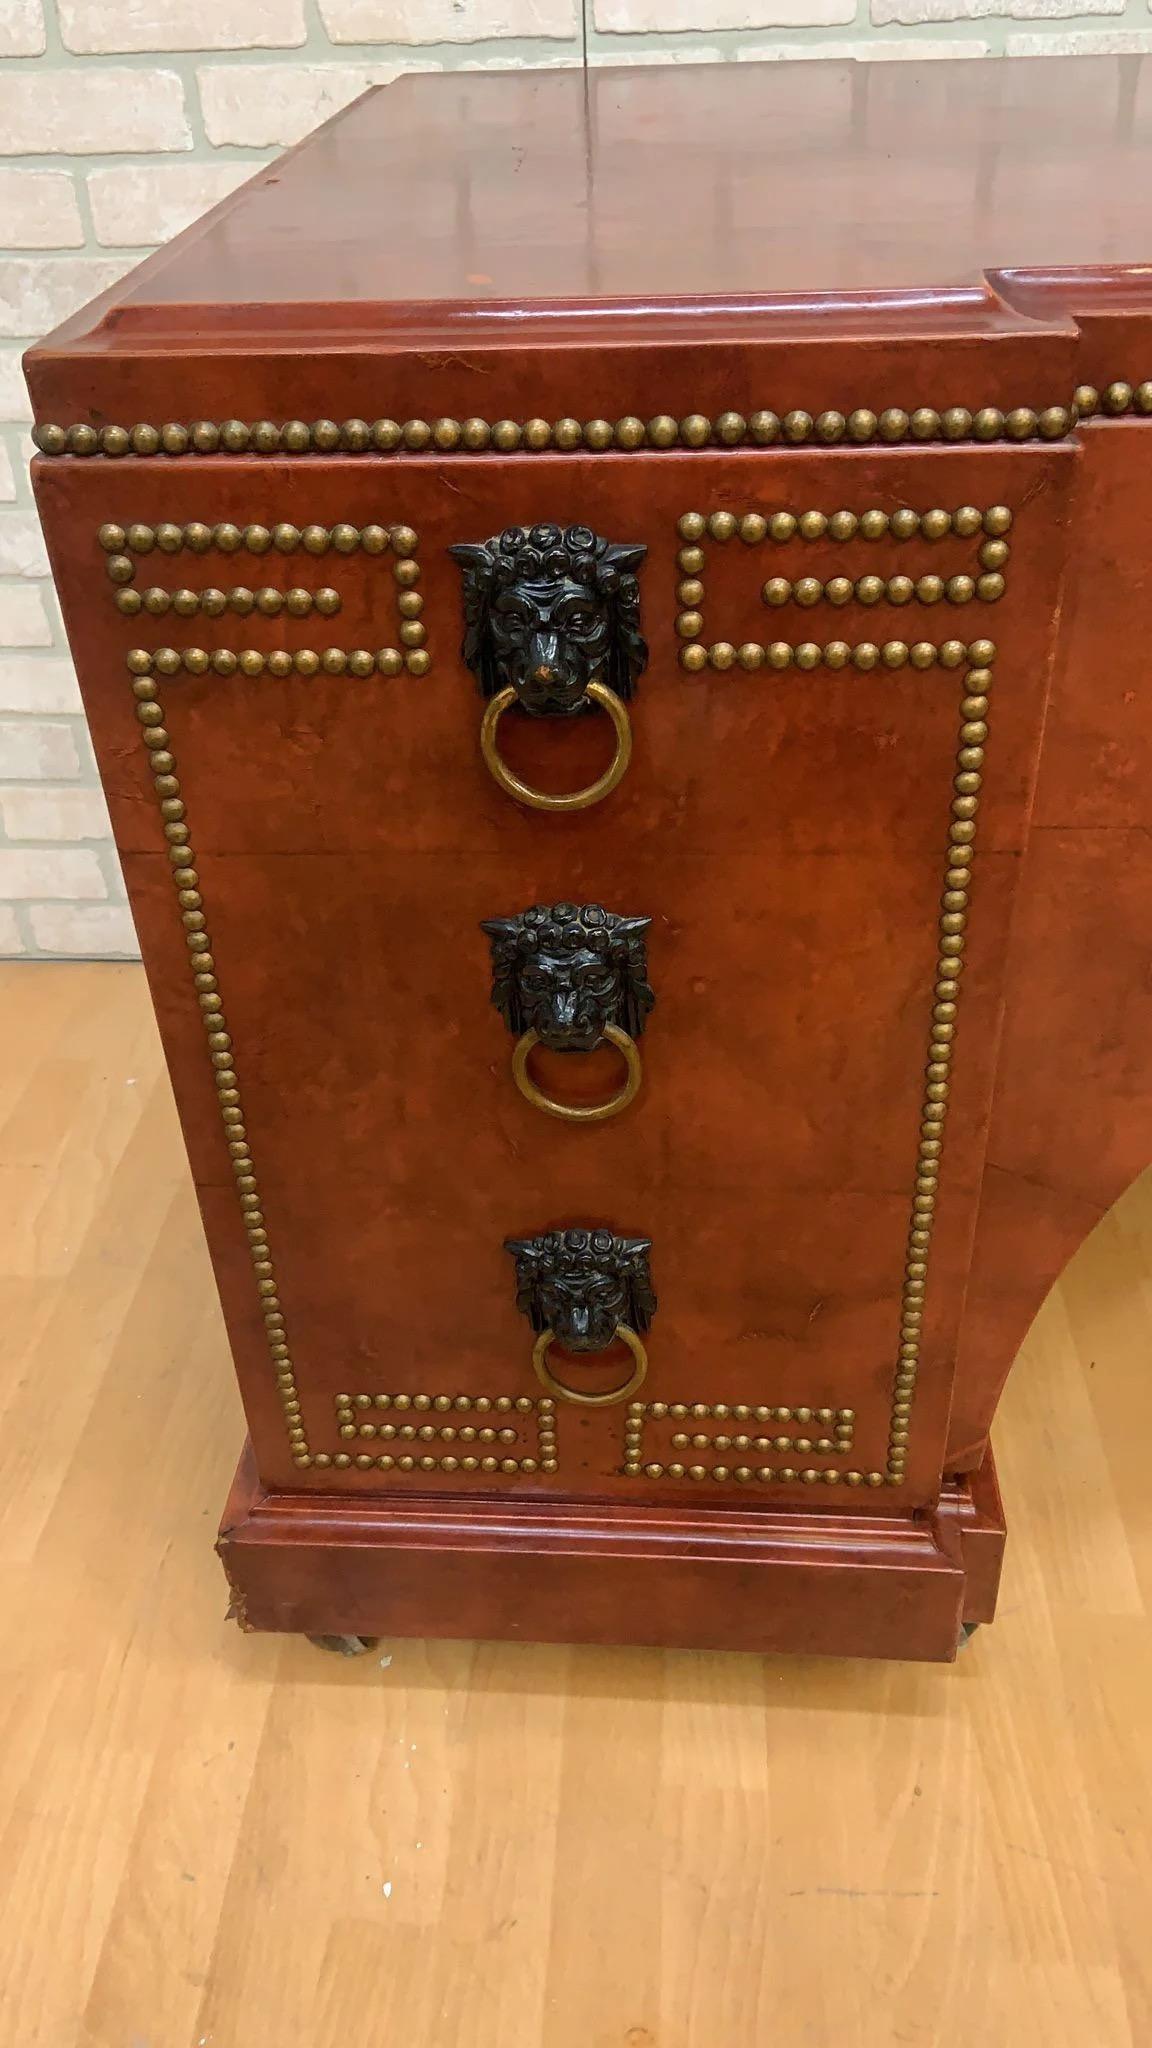 Vintage Baroque Style Leather Wrapped Studded Partner Desk with Lion Pulls

This beautiful, well-made desk has seven drawers on one side and faux drawers on the other. The desk comes complete with all original lion head handles and brown leather top